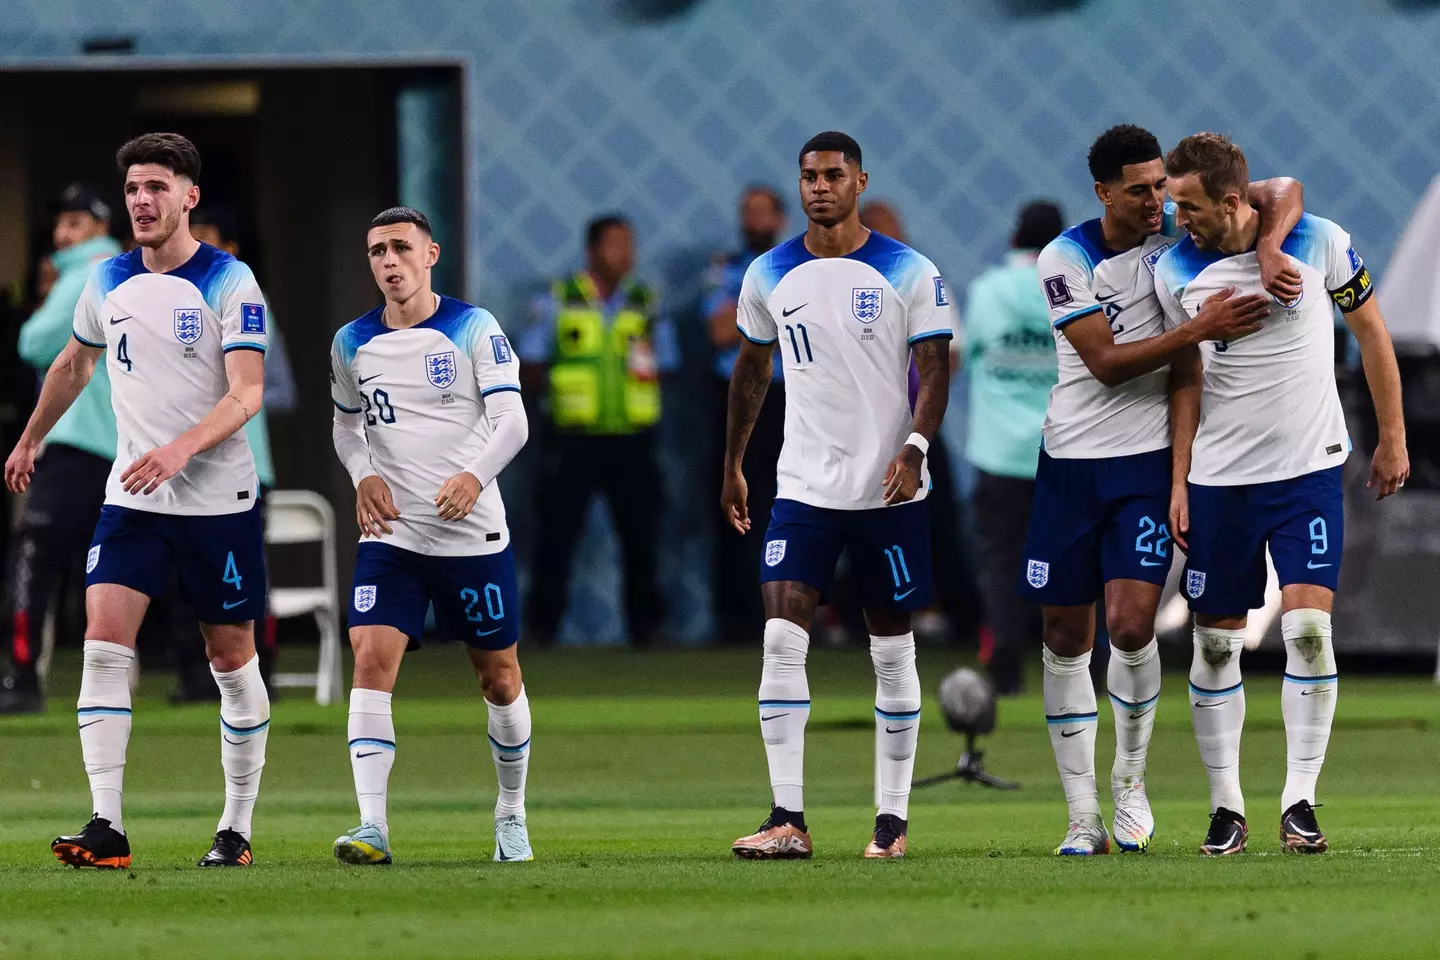 Rashford scored in England's 6-2 win over Iran at the World Cup (Image: Alamy)